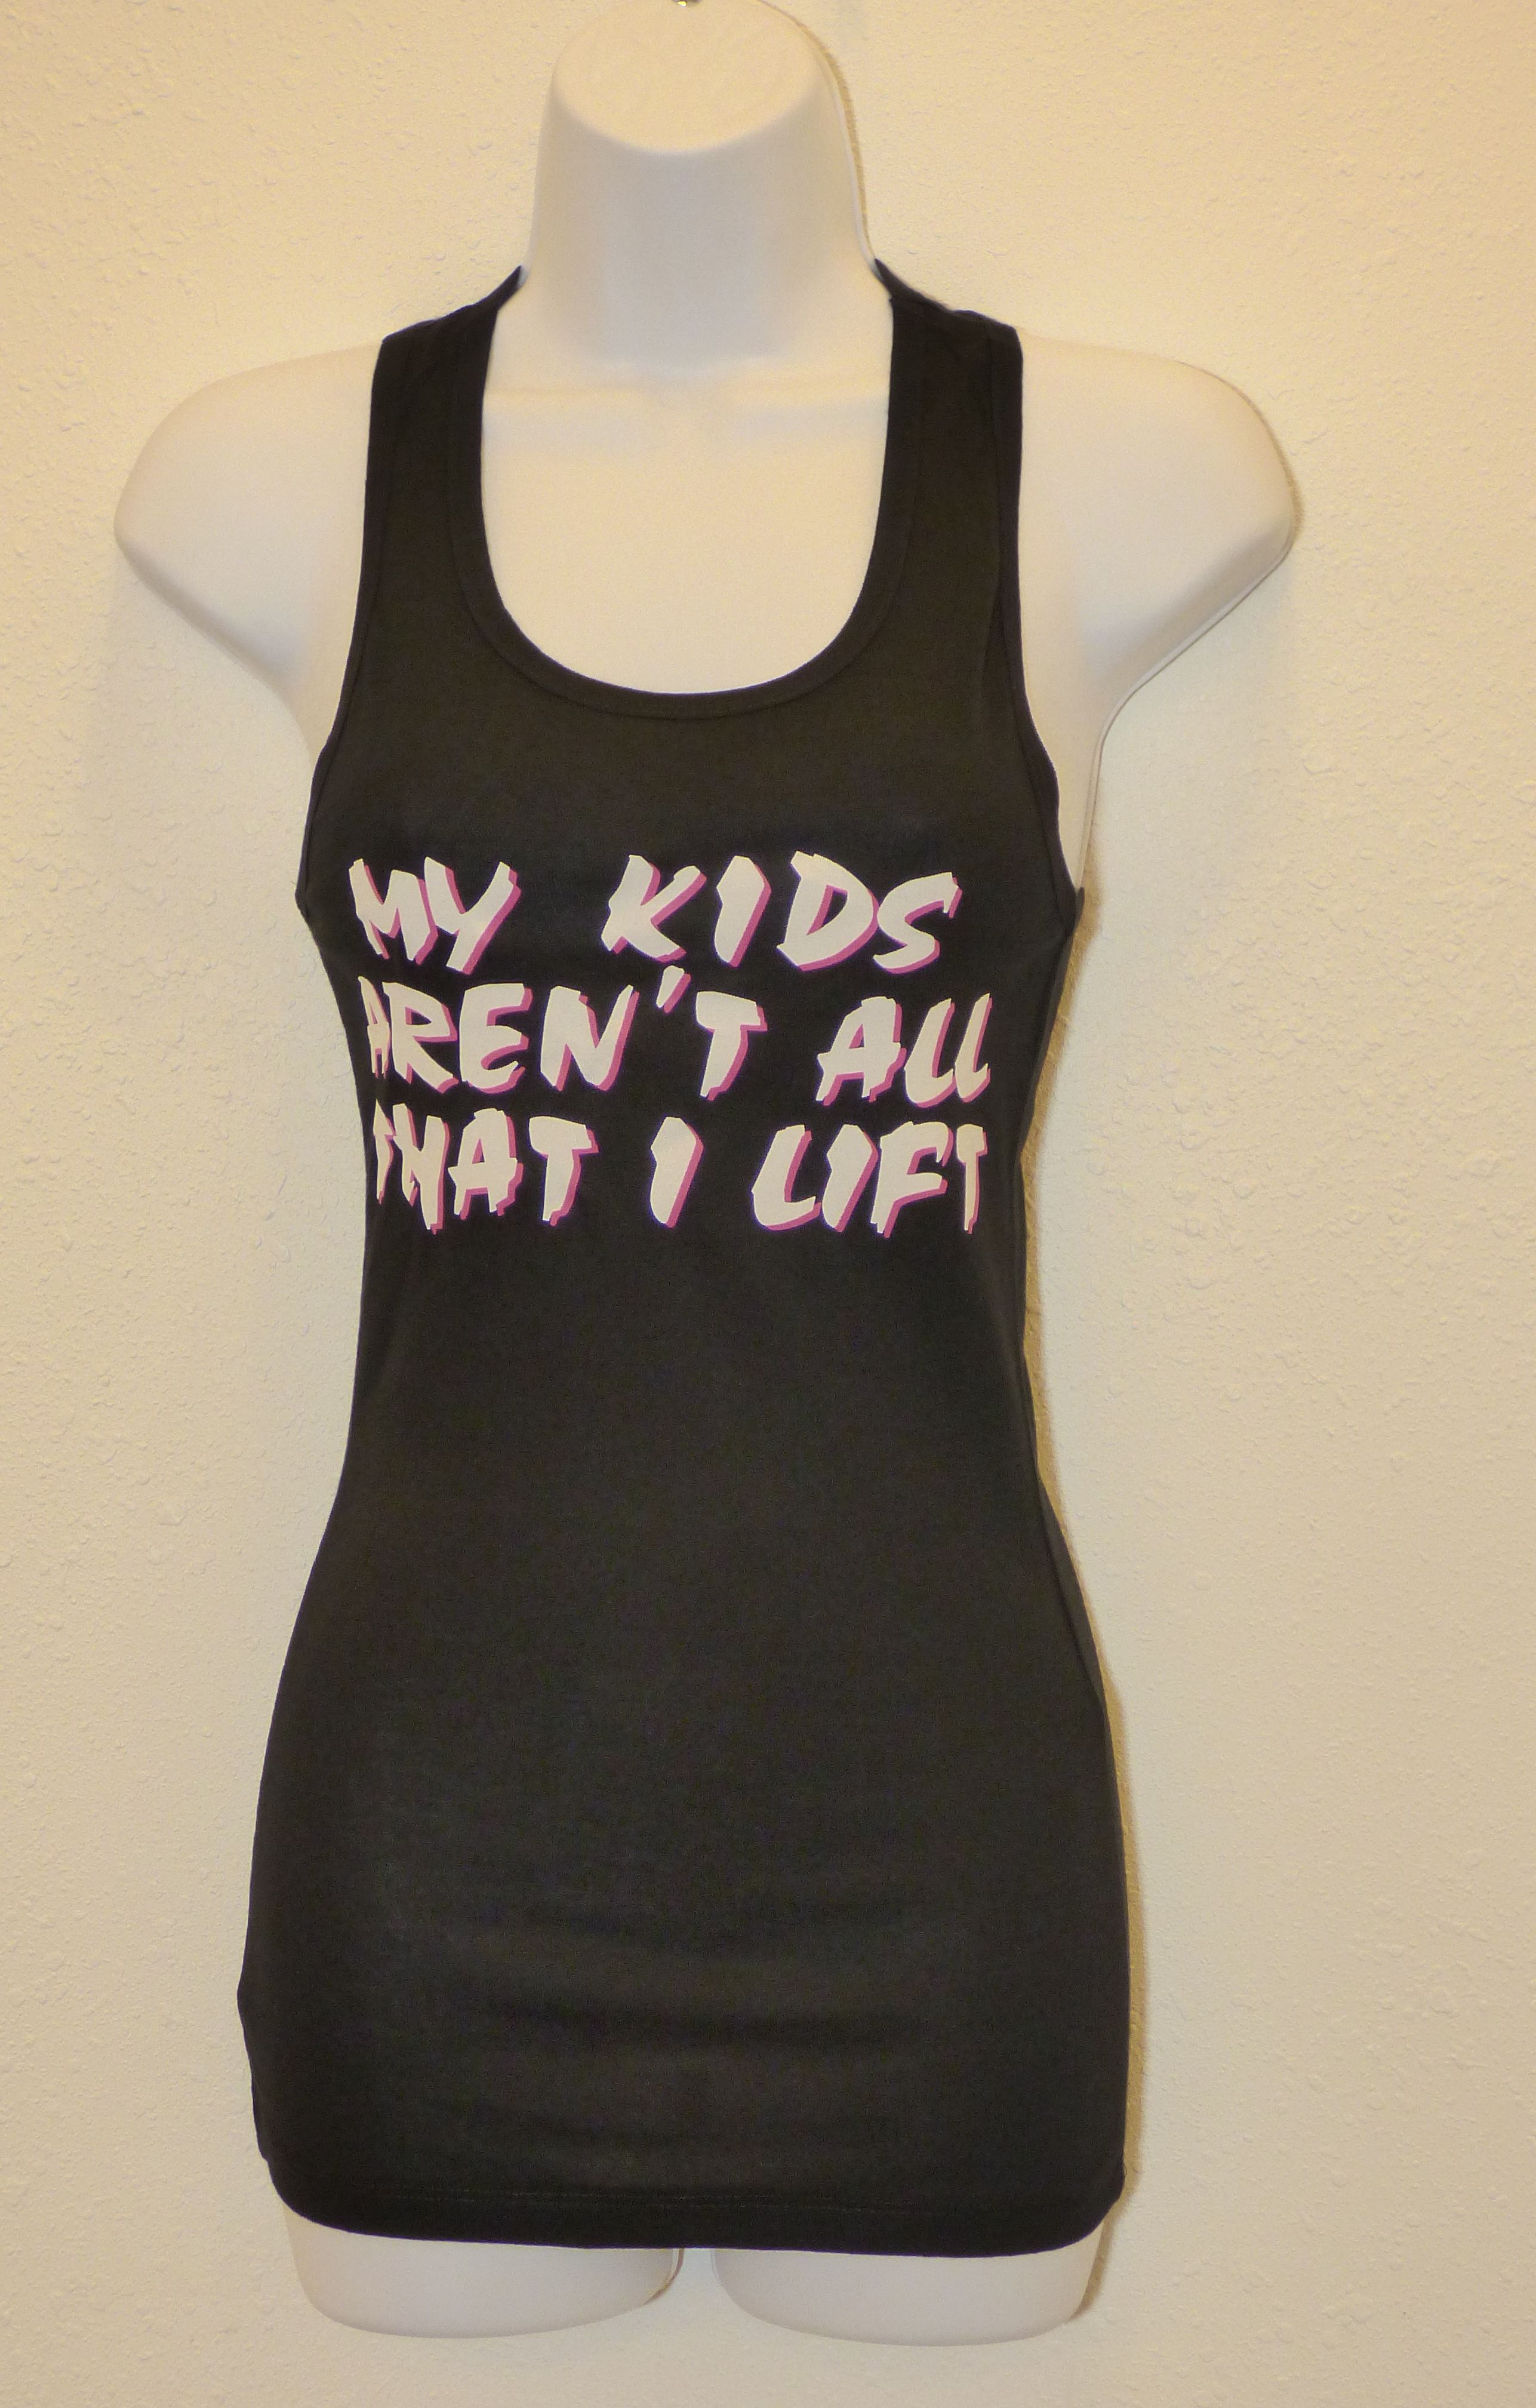 Women's 'My kids aren't all that I lift' fitted tank